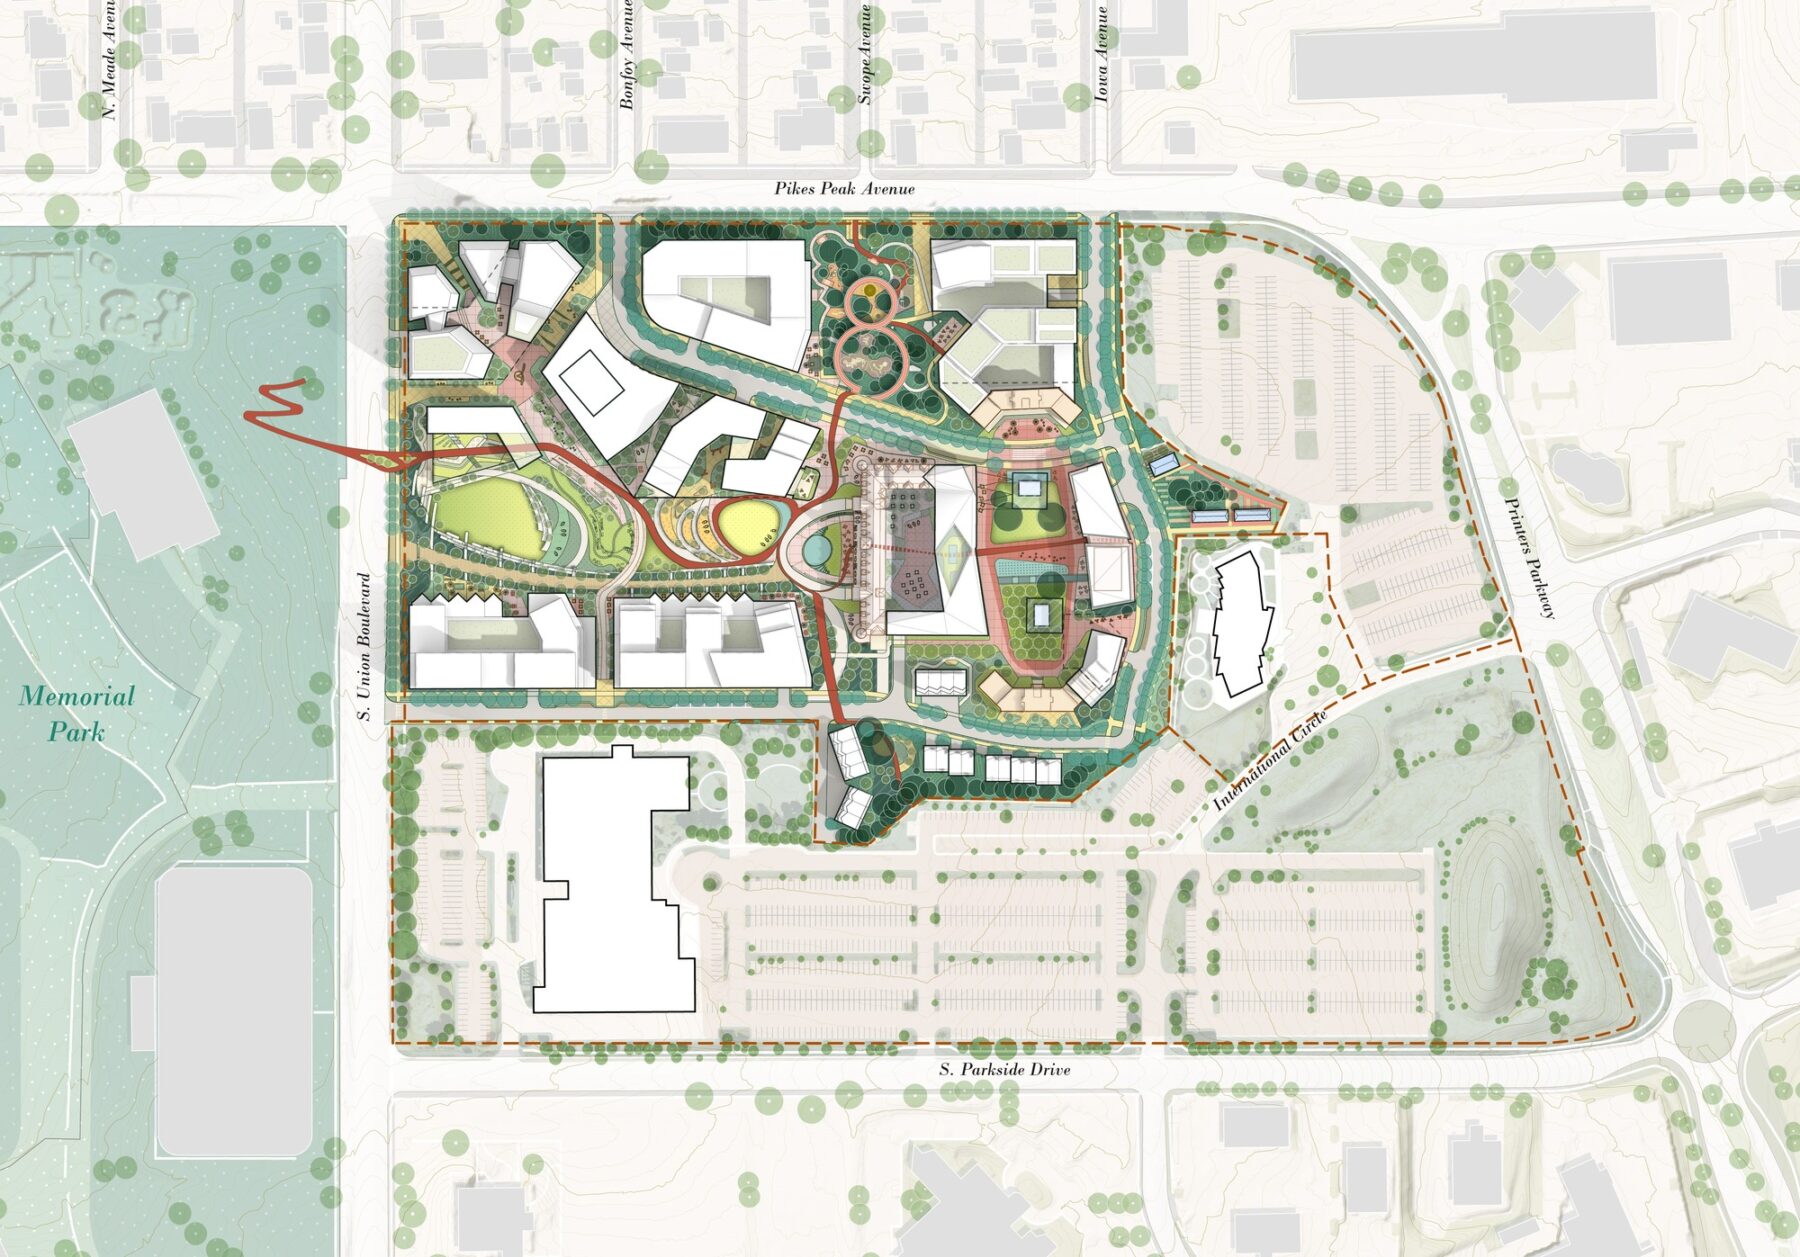 Illustrated site plan showing the master planned site with surrounding streets and Memorial Park